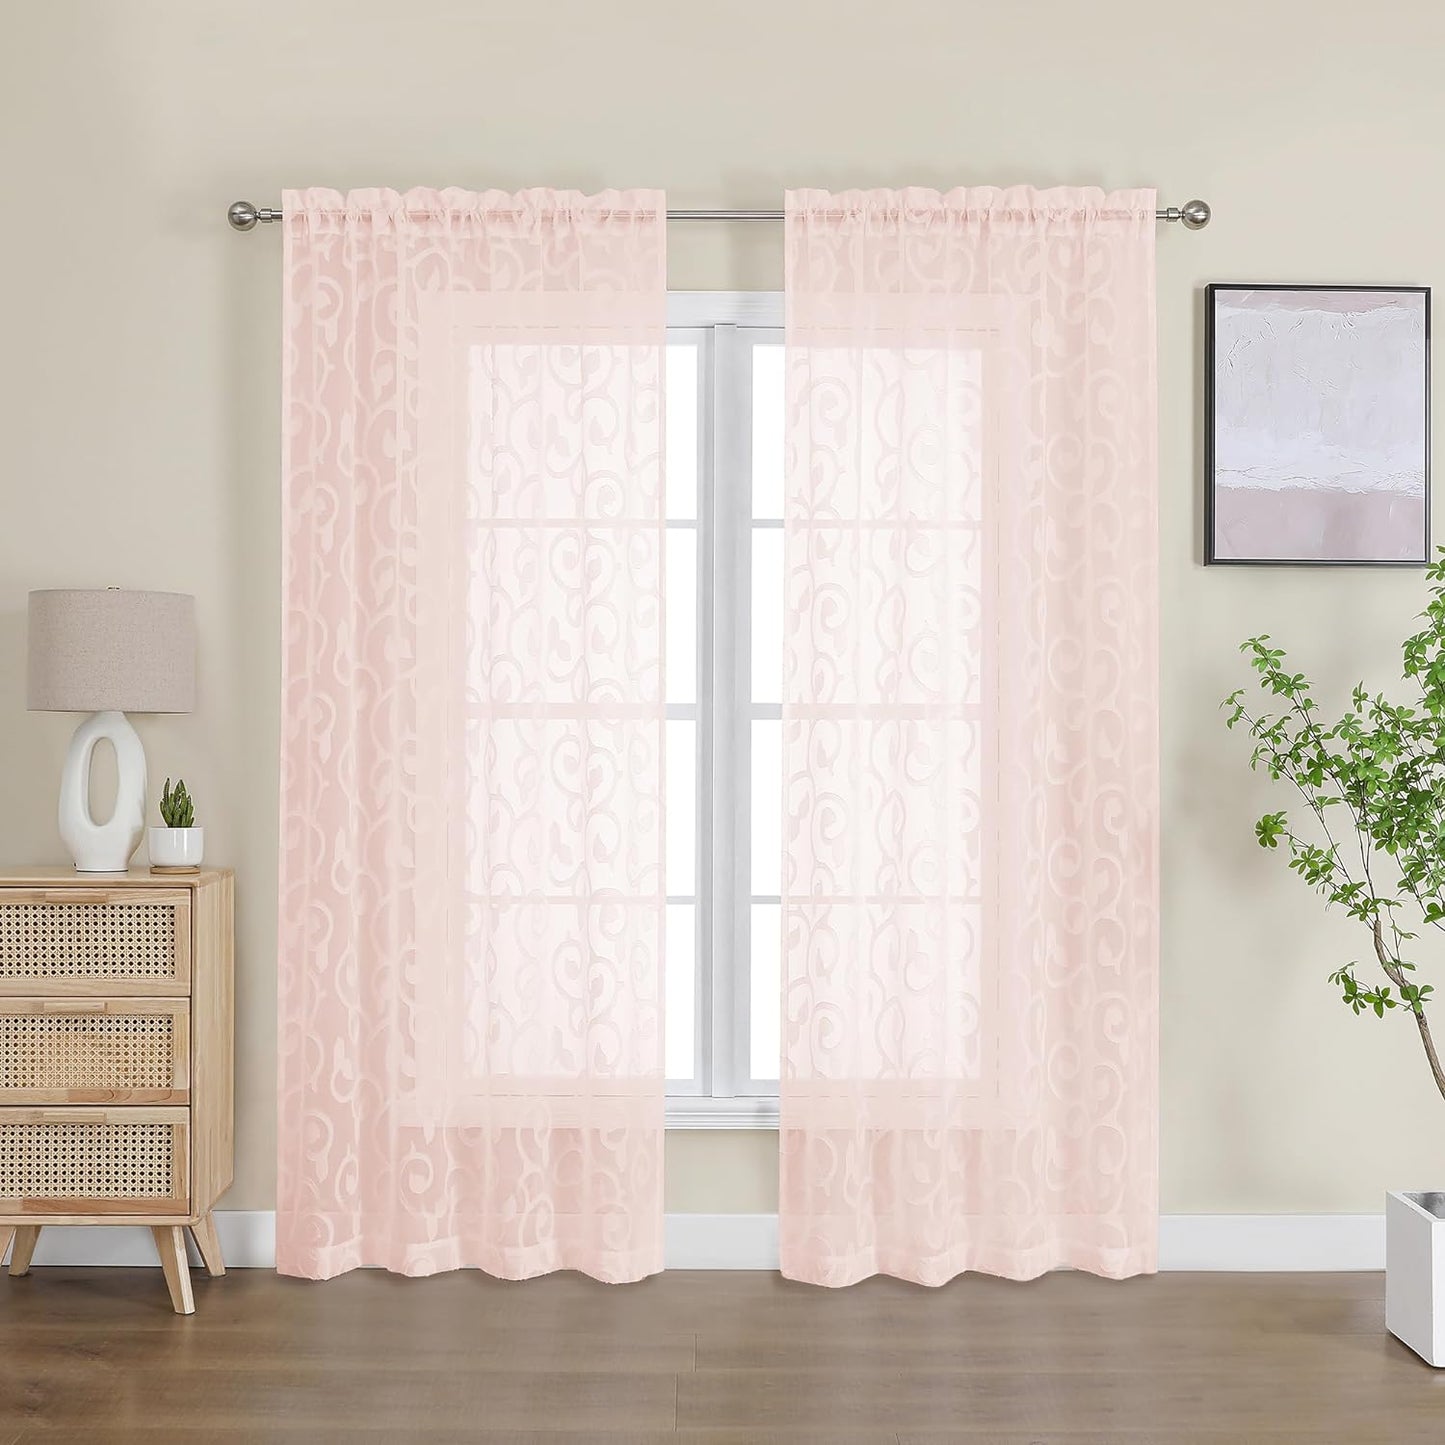 OWENIE Furman Sheer Curtains 84 Inches Long for Bedroom Living Room 2 Panels Set, Light Filtering Window Curtains, Semi Transparent Voile Top Dual Rod Pocket, Grey, 40Wx84L Inch, Total 84 Inches Width  OWENIE Blush 40W X 72L 